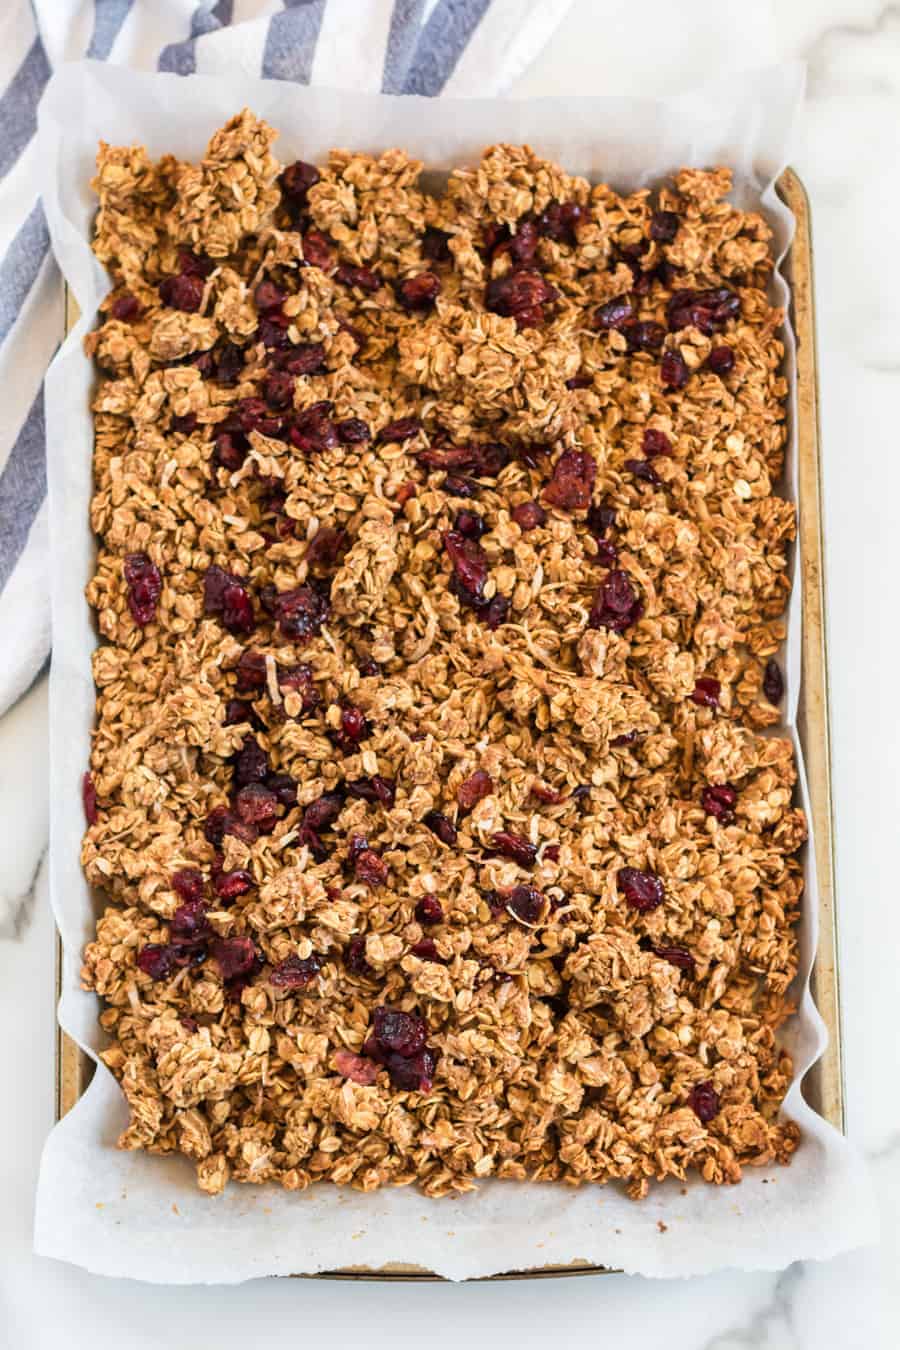 Cinnamon Granola is a simple snack that's bursting with mildly sweet and crunchy goodness, thanks to the oats, honey, shredded coconut, dried cranberries, cinnamon, vanilla, and nuts.